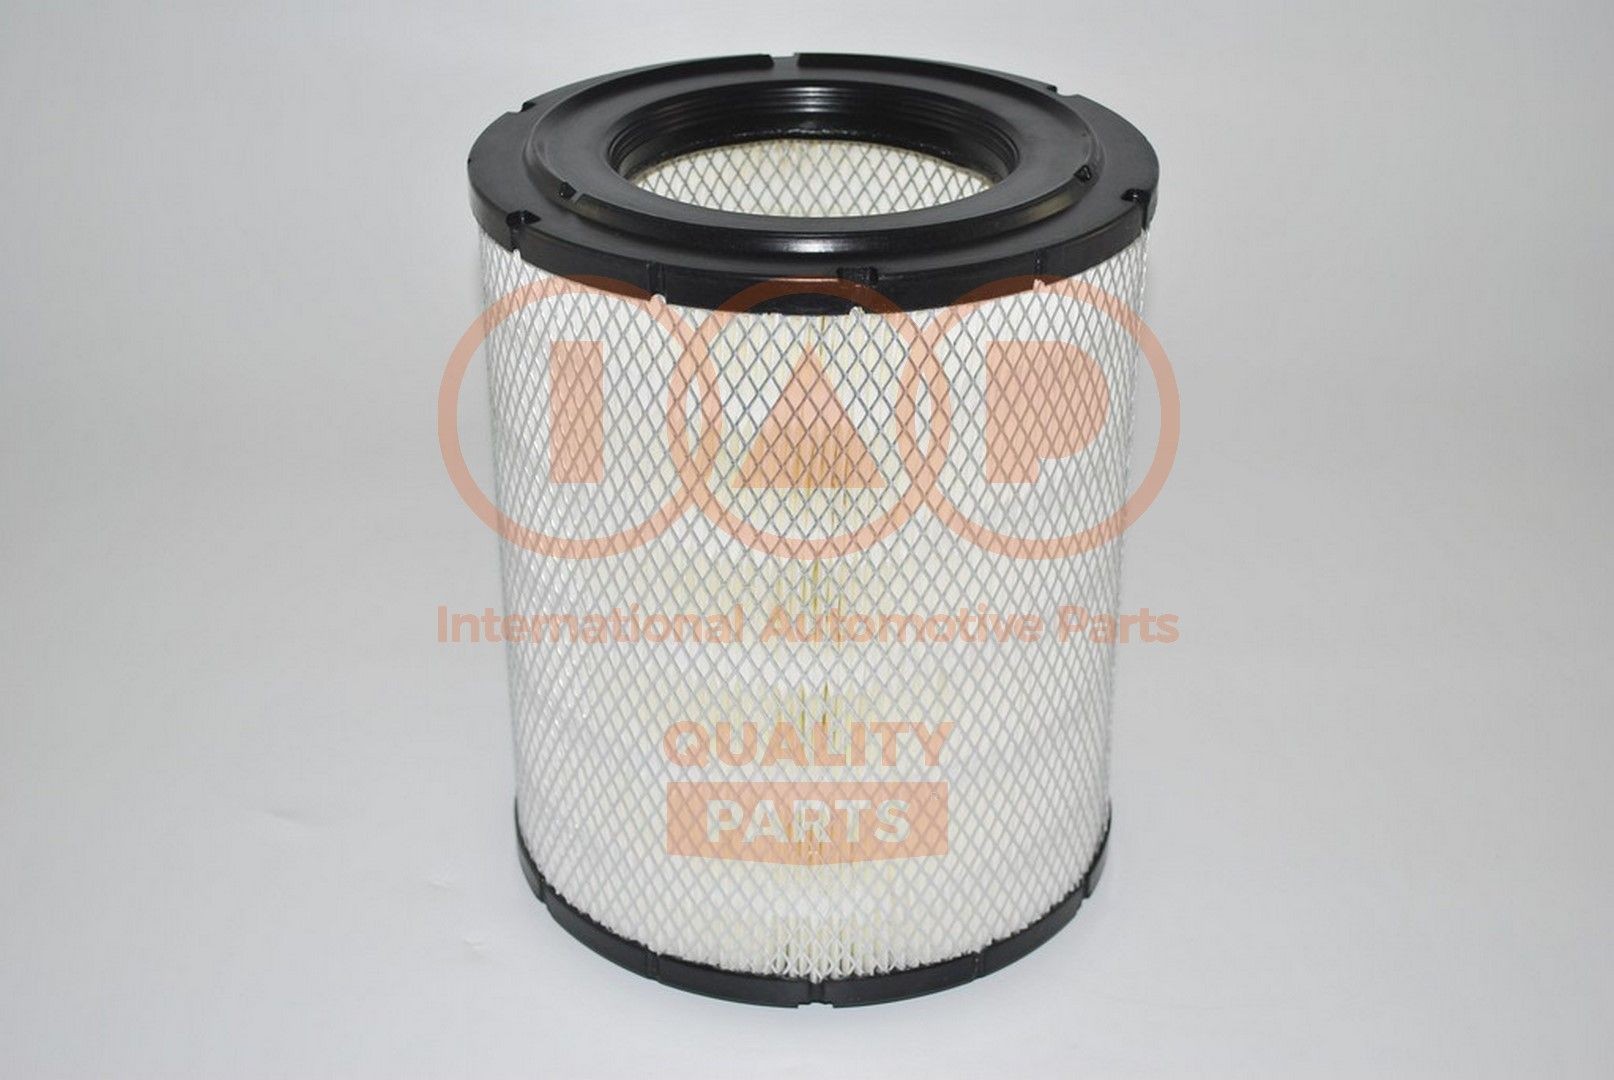 IAP QUALITY PARTS 121-09093 Luchtfilter 8-97062-294-0